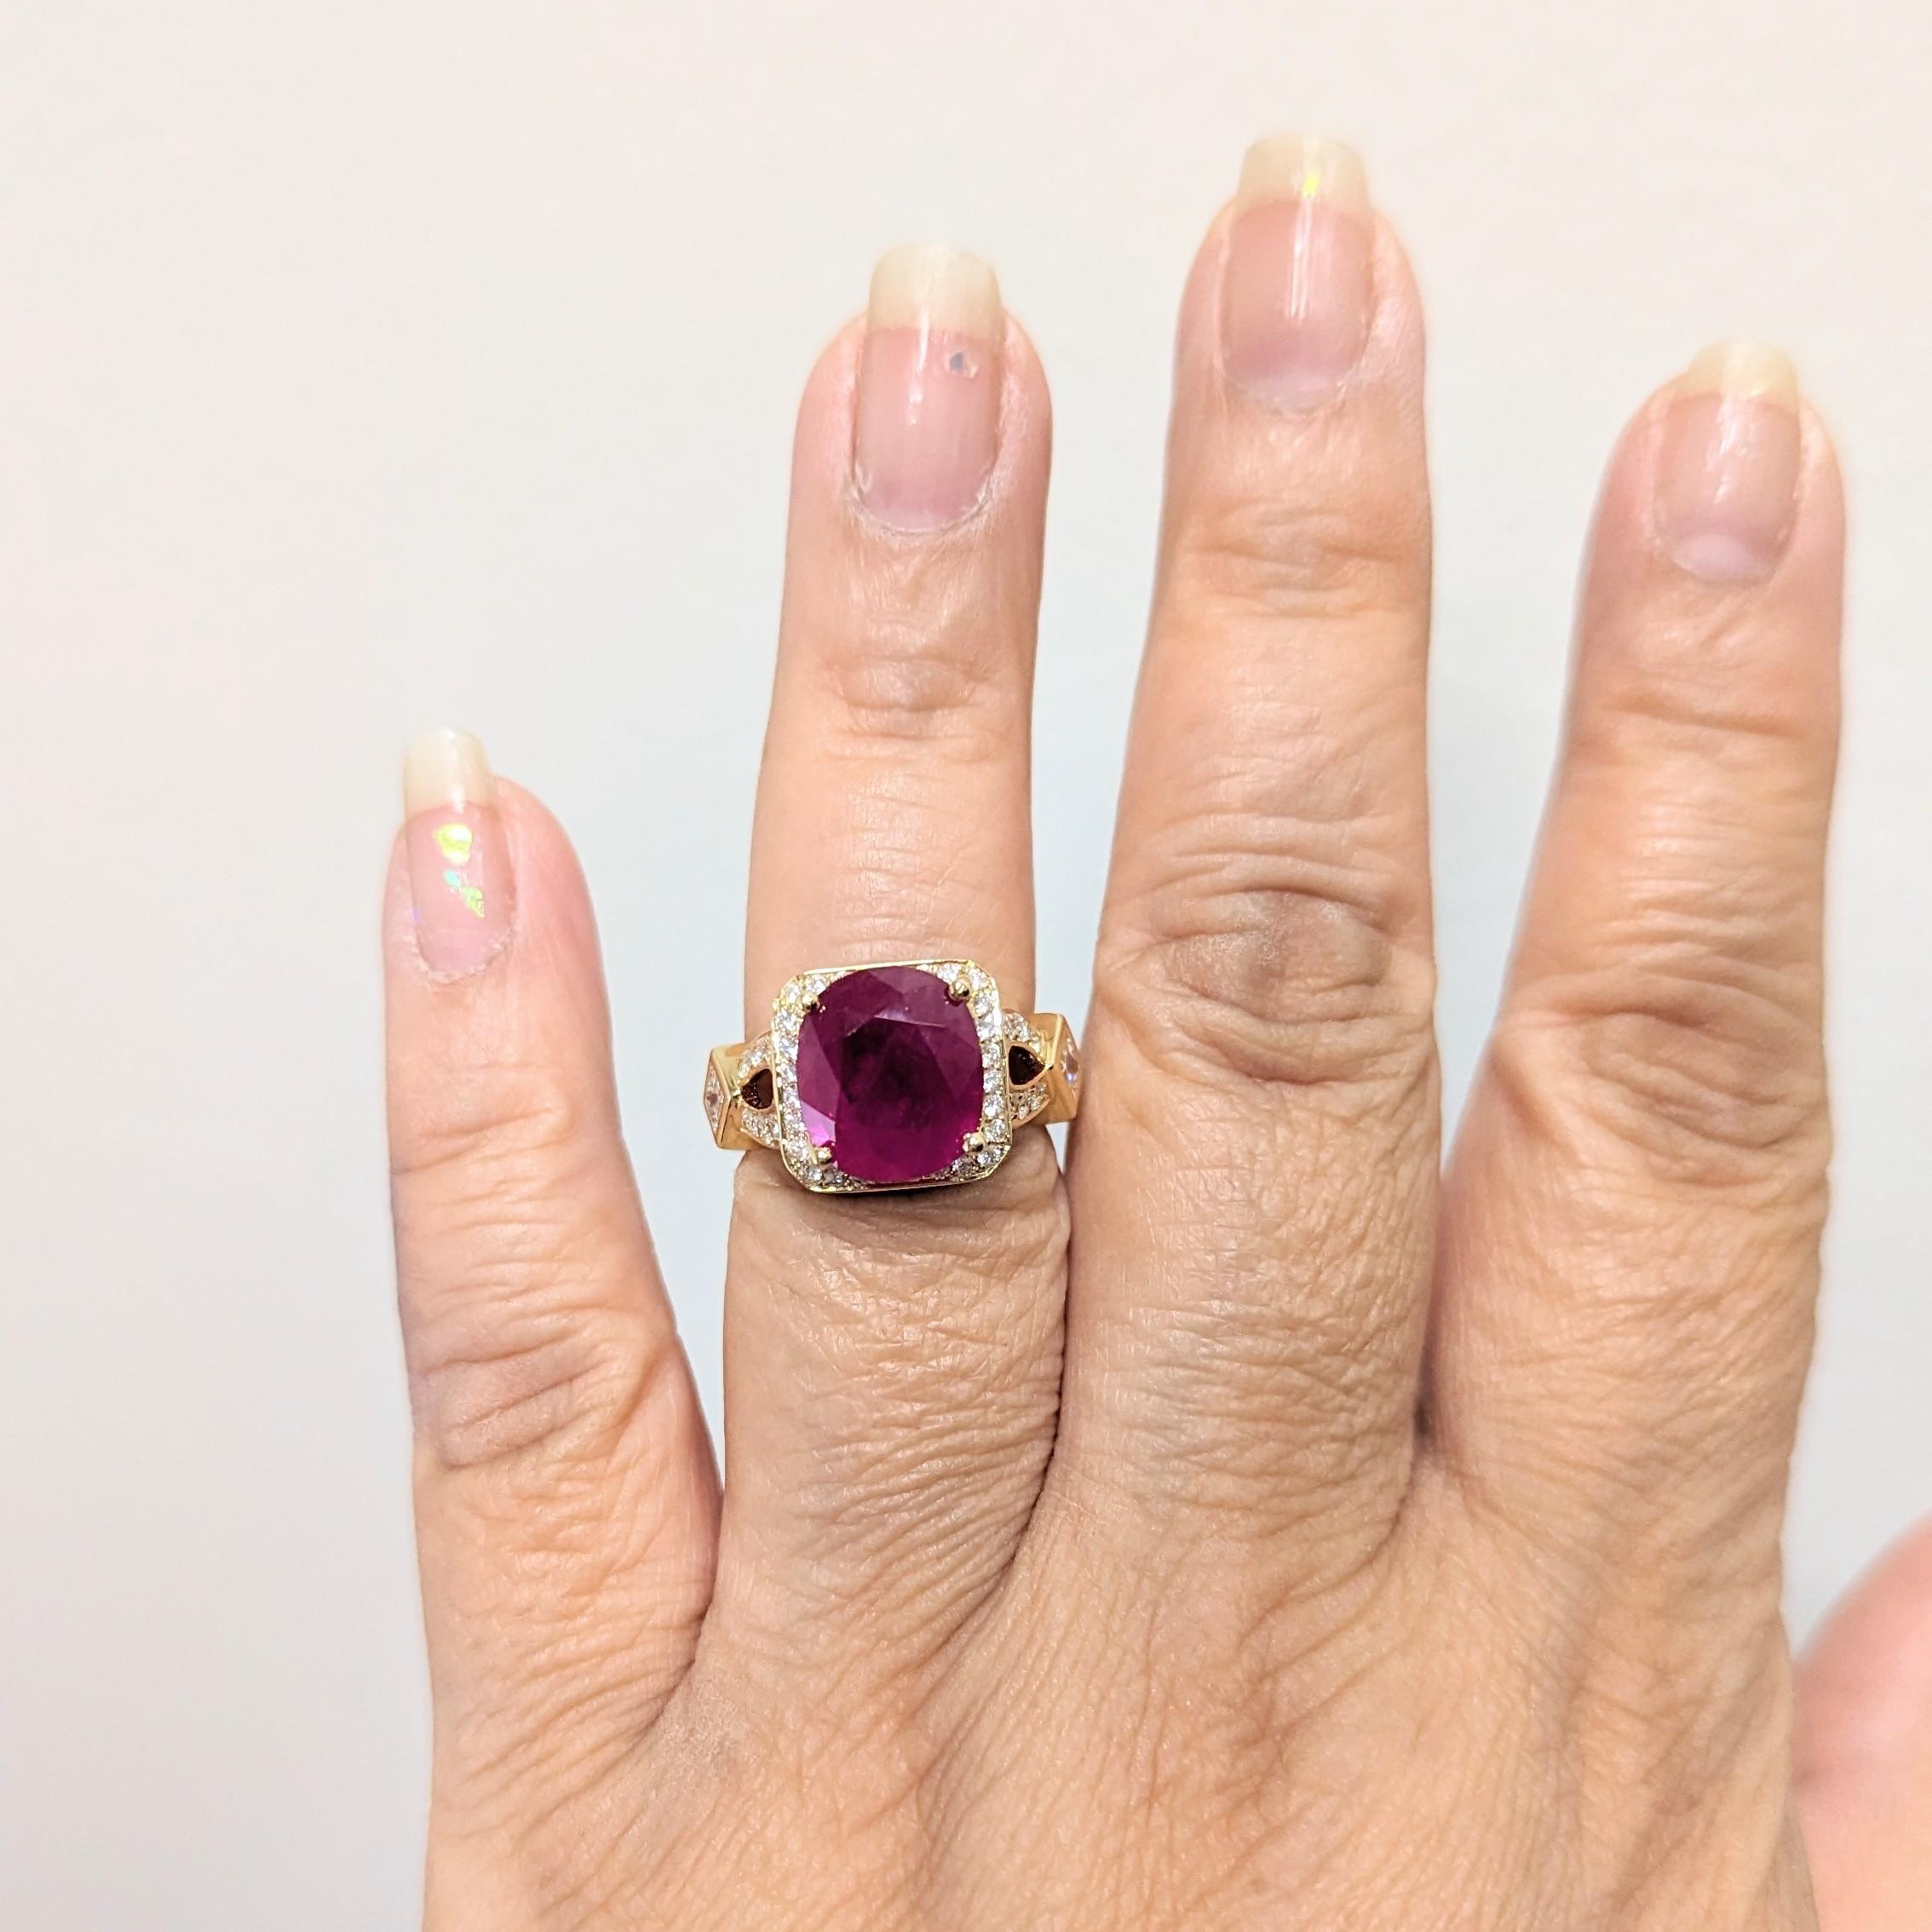 Beautiful Guild certified Burma ruby weighing 6.26 ct. with good quality, white, and bright diamond rounds and squares.  Handmade in 18k yellow gold.  Ring size 7.